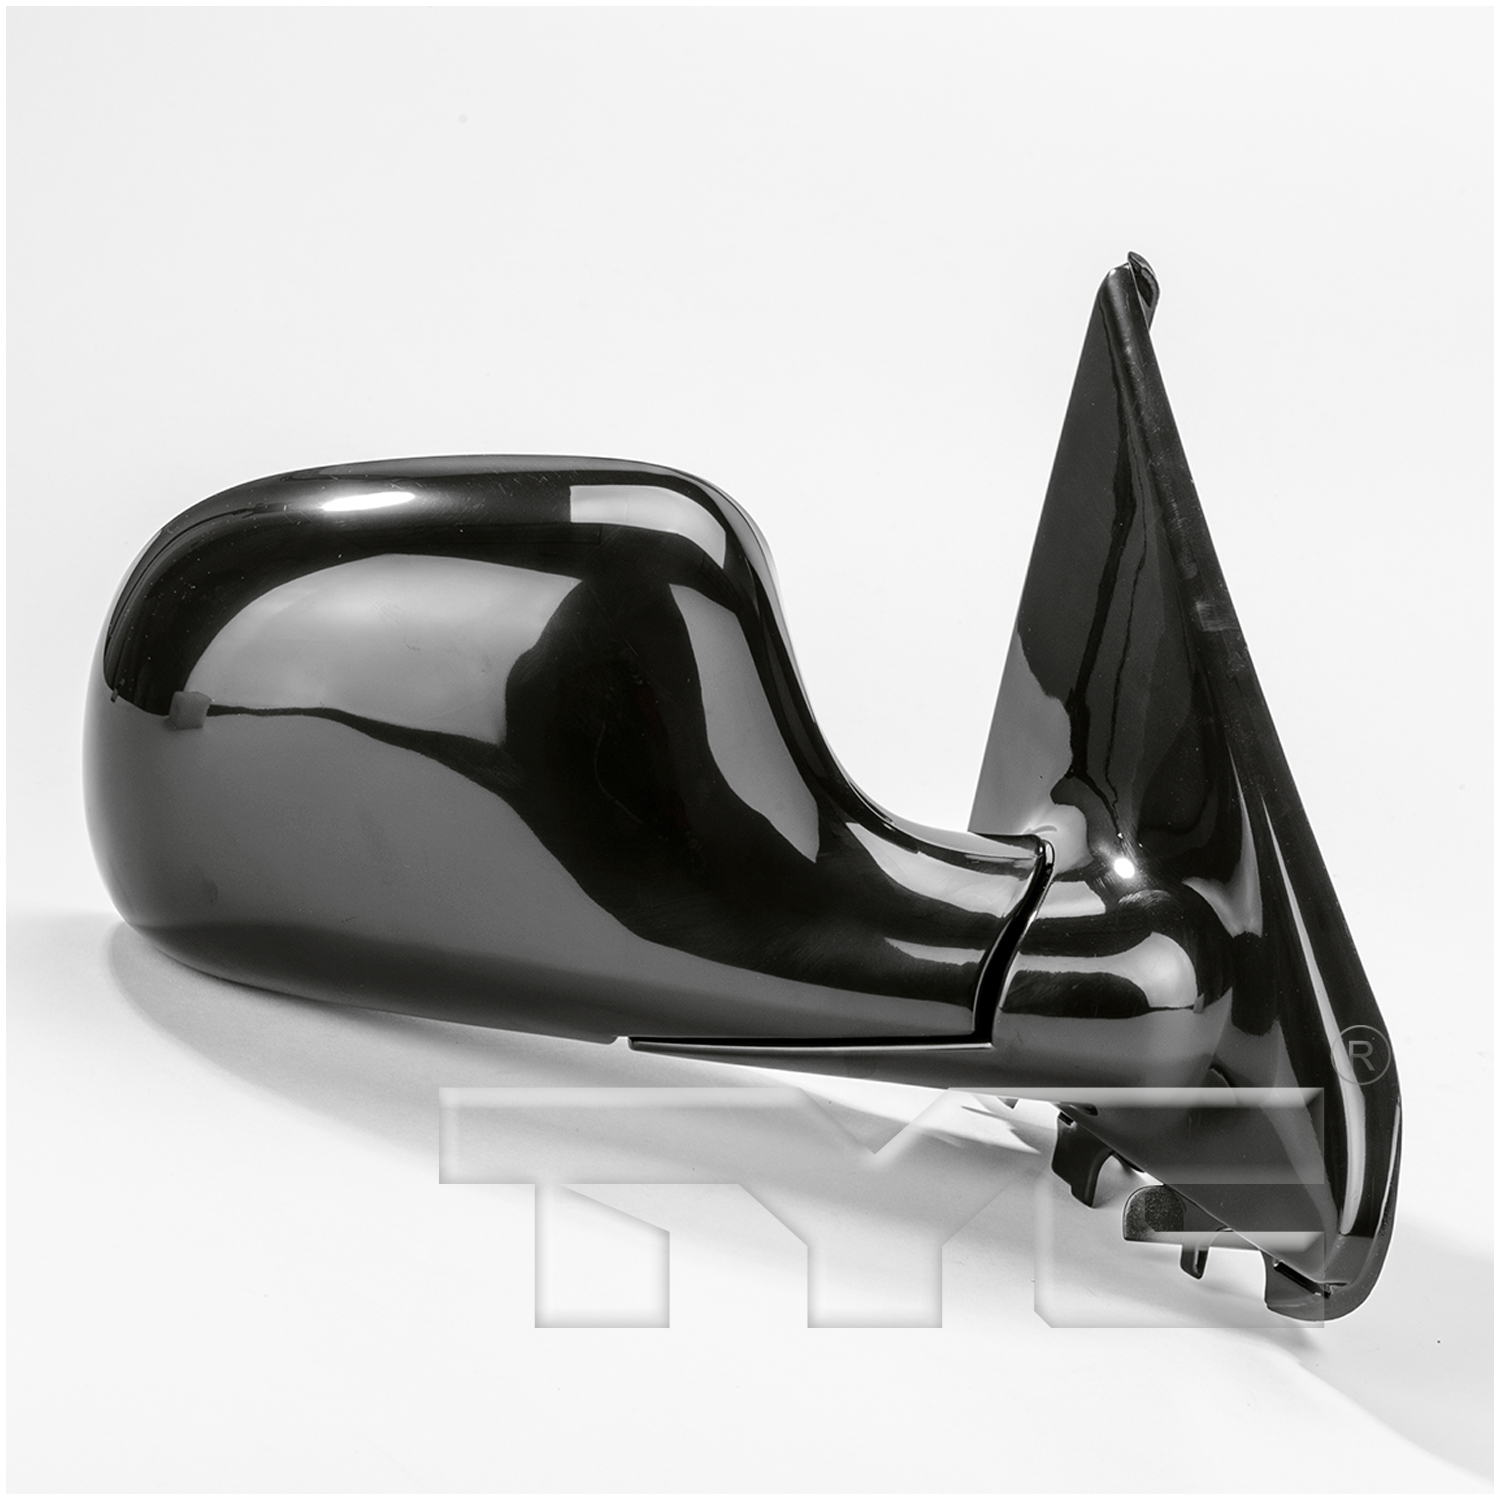 Aftermarket MIRRORS for CHRYSLER - TOWN & COUNTRY, TOWN & COUNTRY,96-00,RT Mirror outside rear view